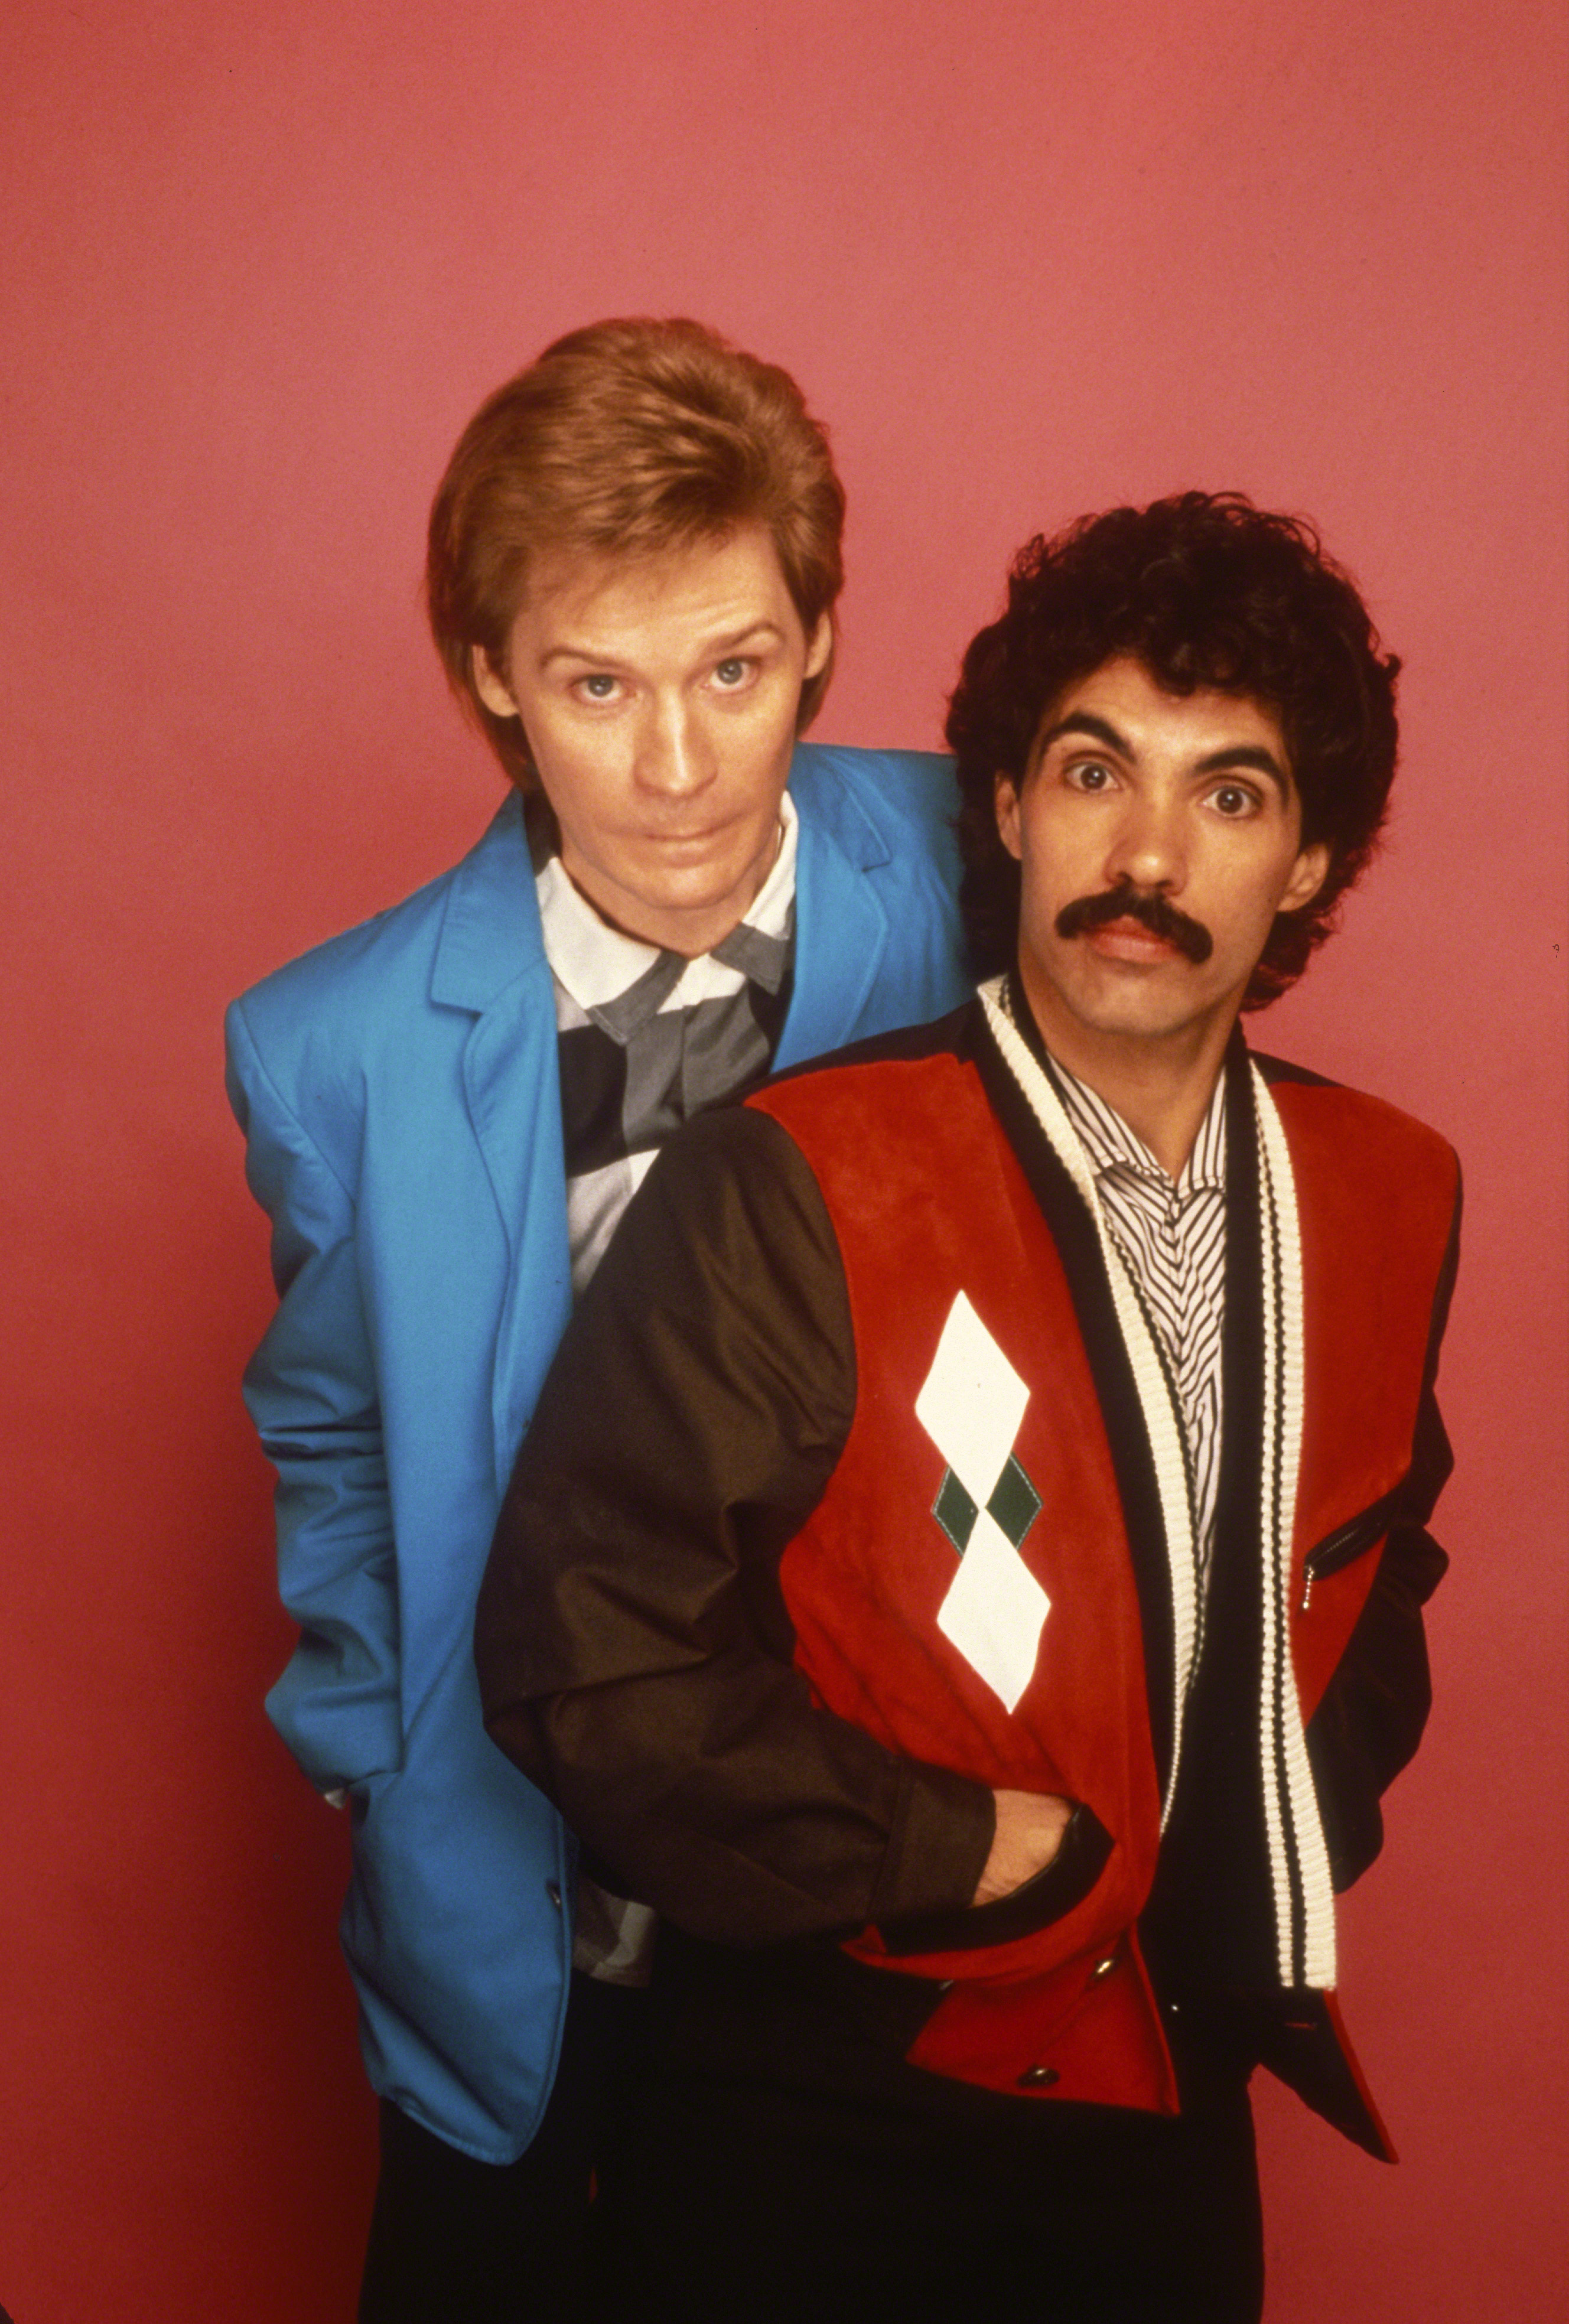 Hall & Oates: Our 1988 Interview